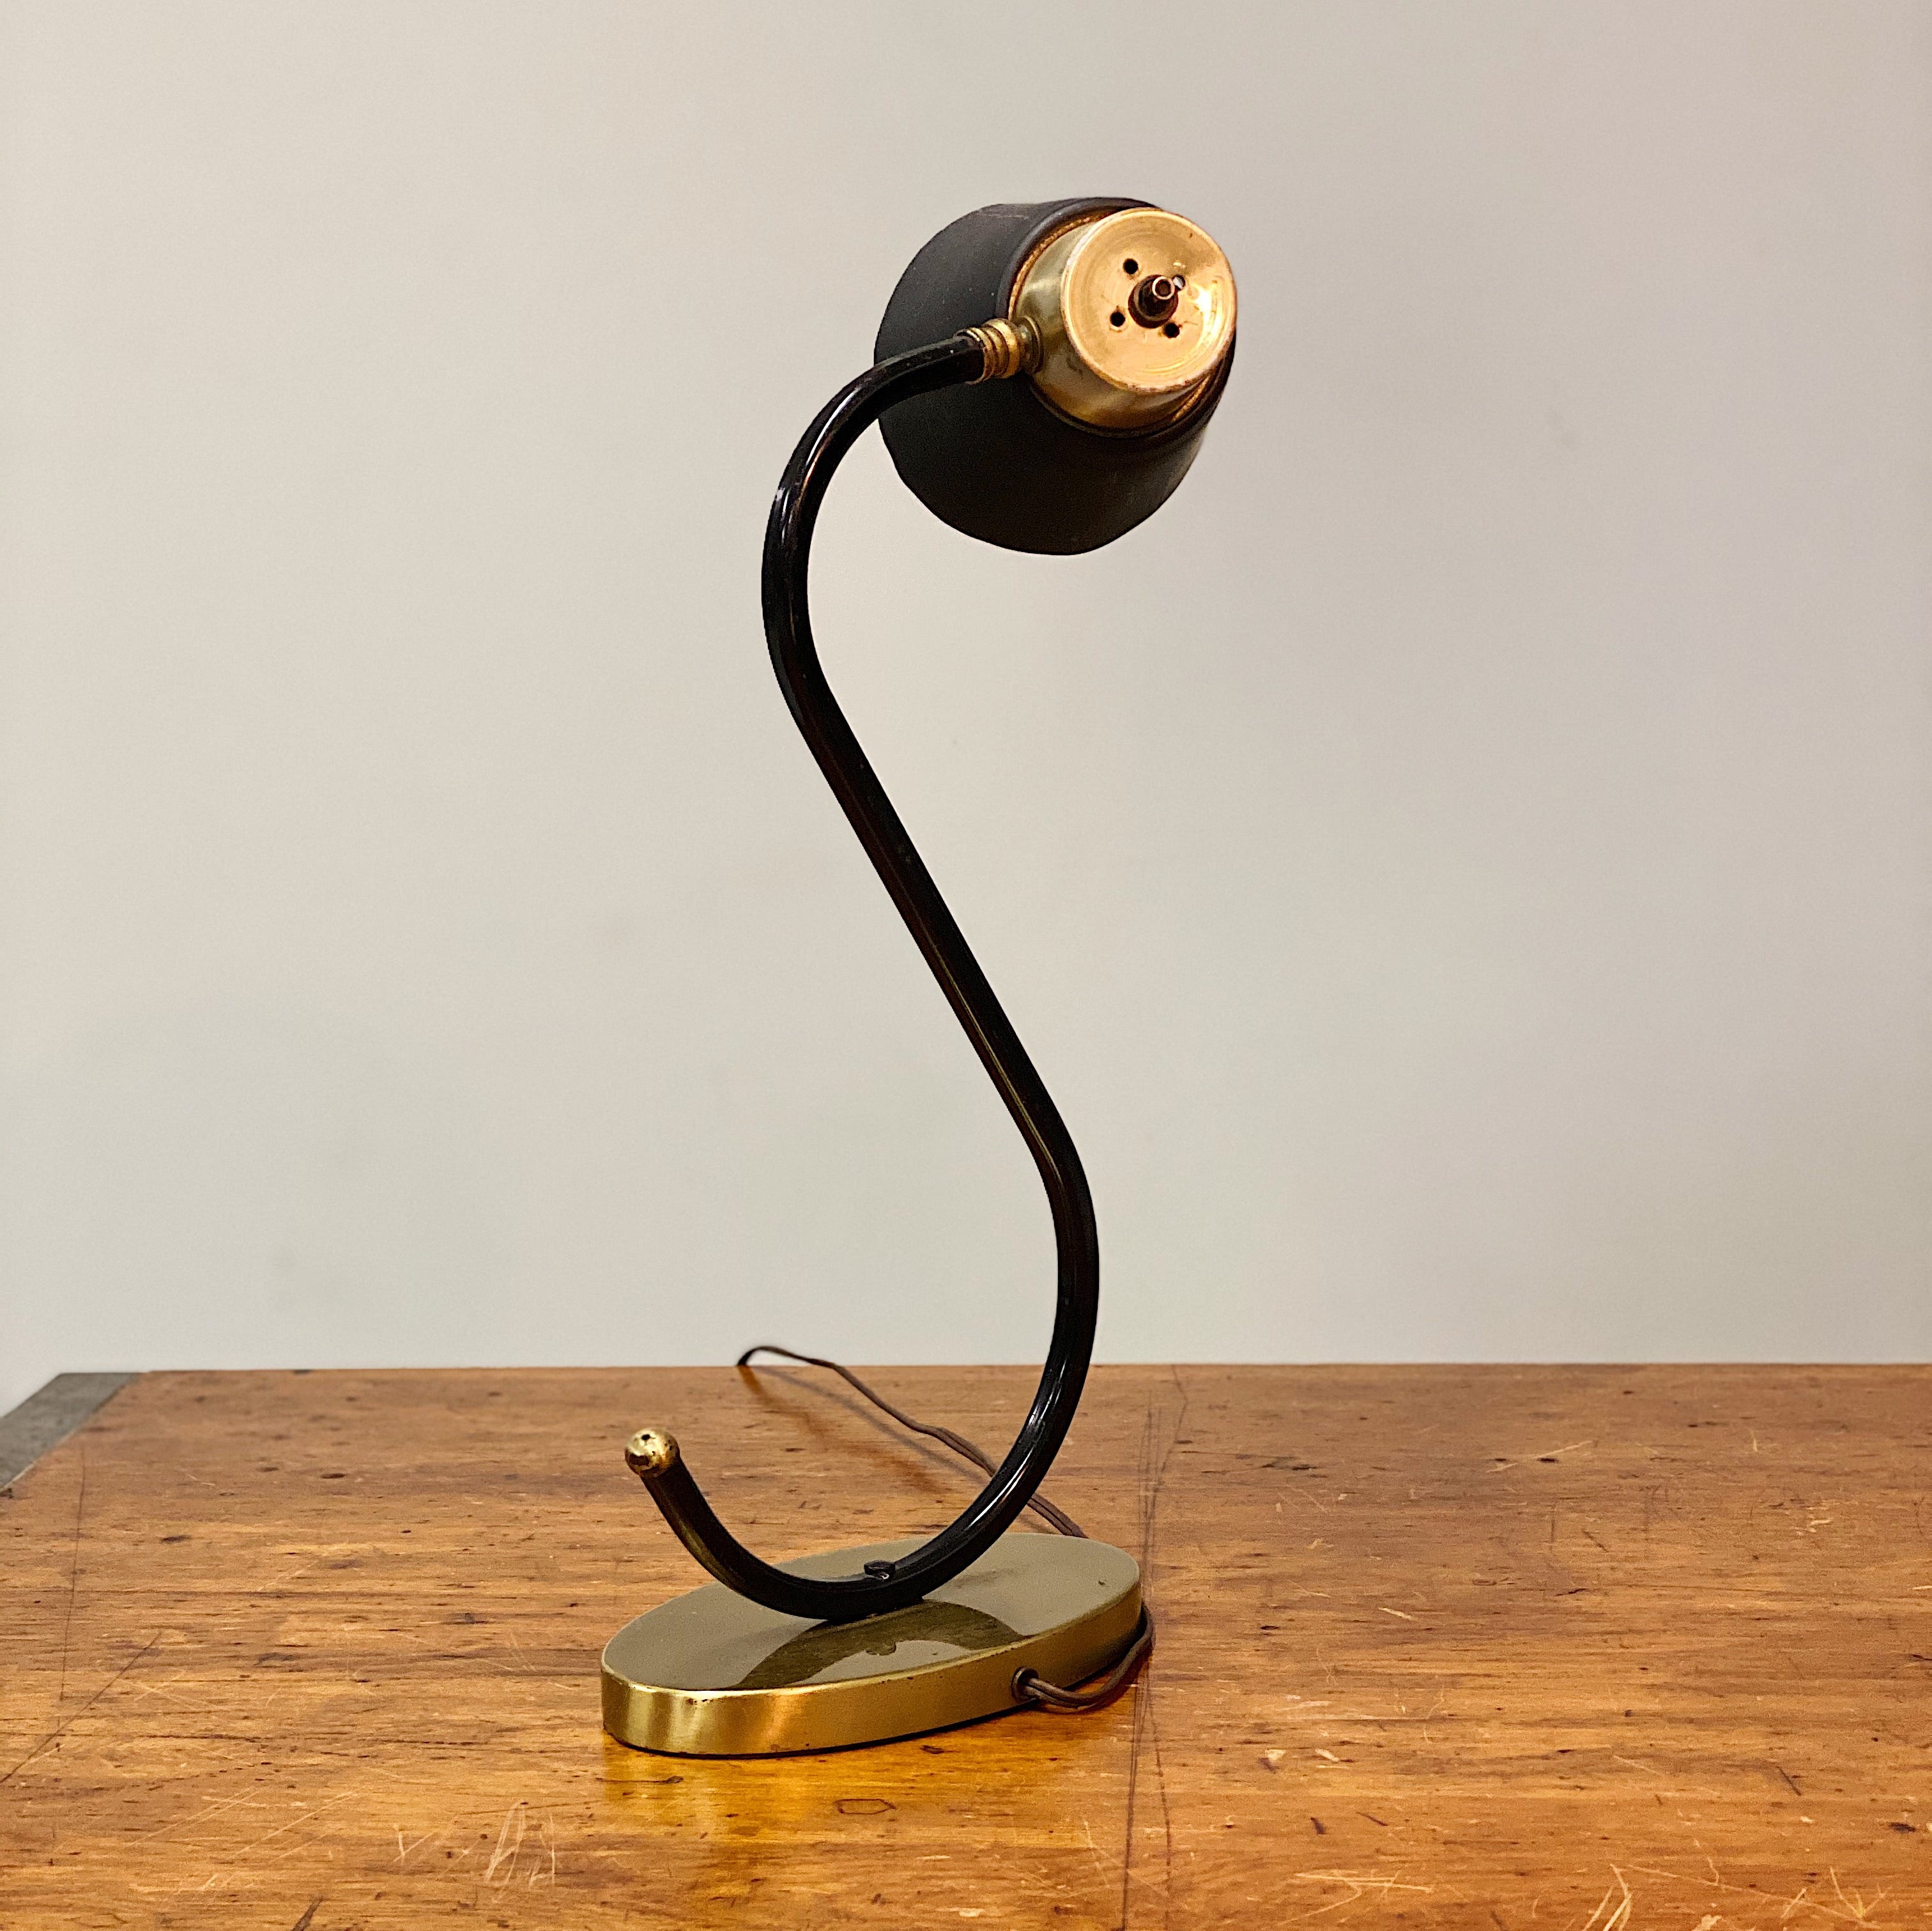 Knuckle adjuster for Vintage Midcentury Desk Lamp with Unusual S Shape - Mod Black Table Lamp - Atomic Age Lighting - Rare 1950s Accent Light